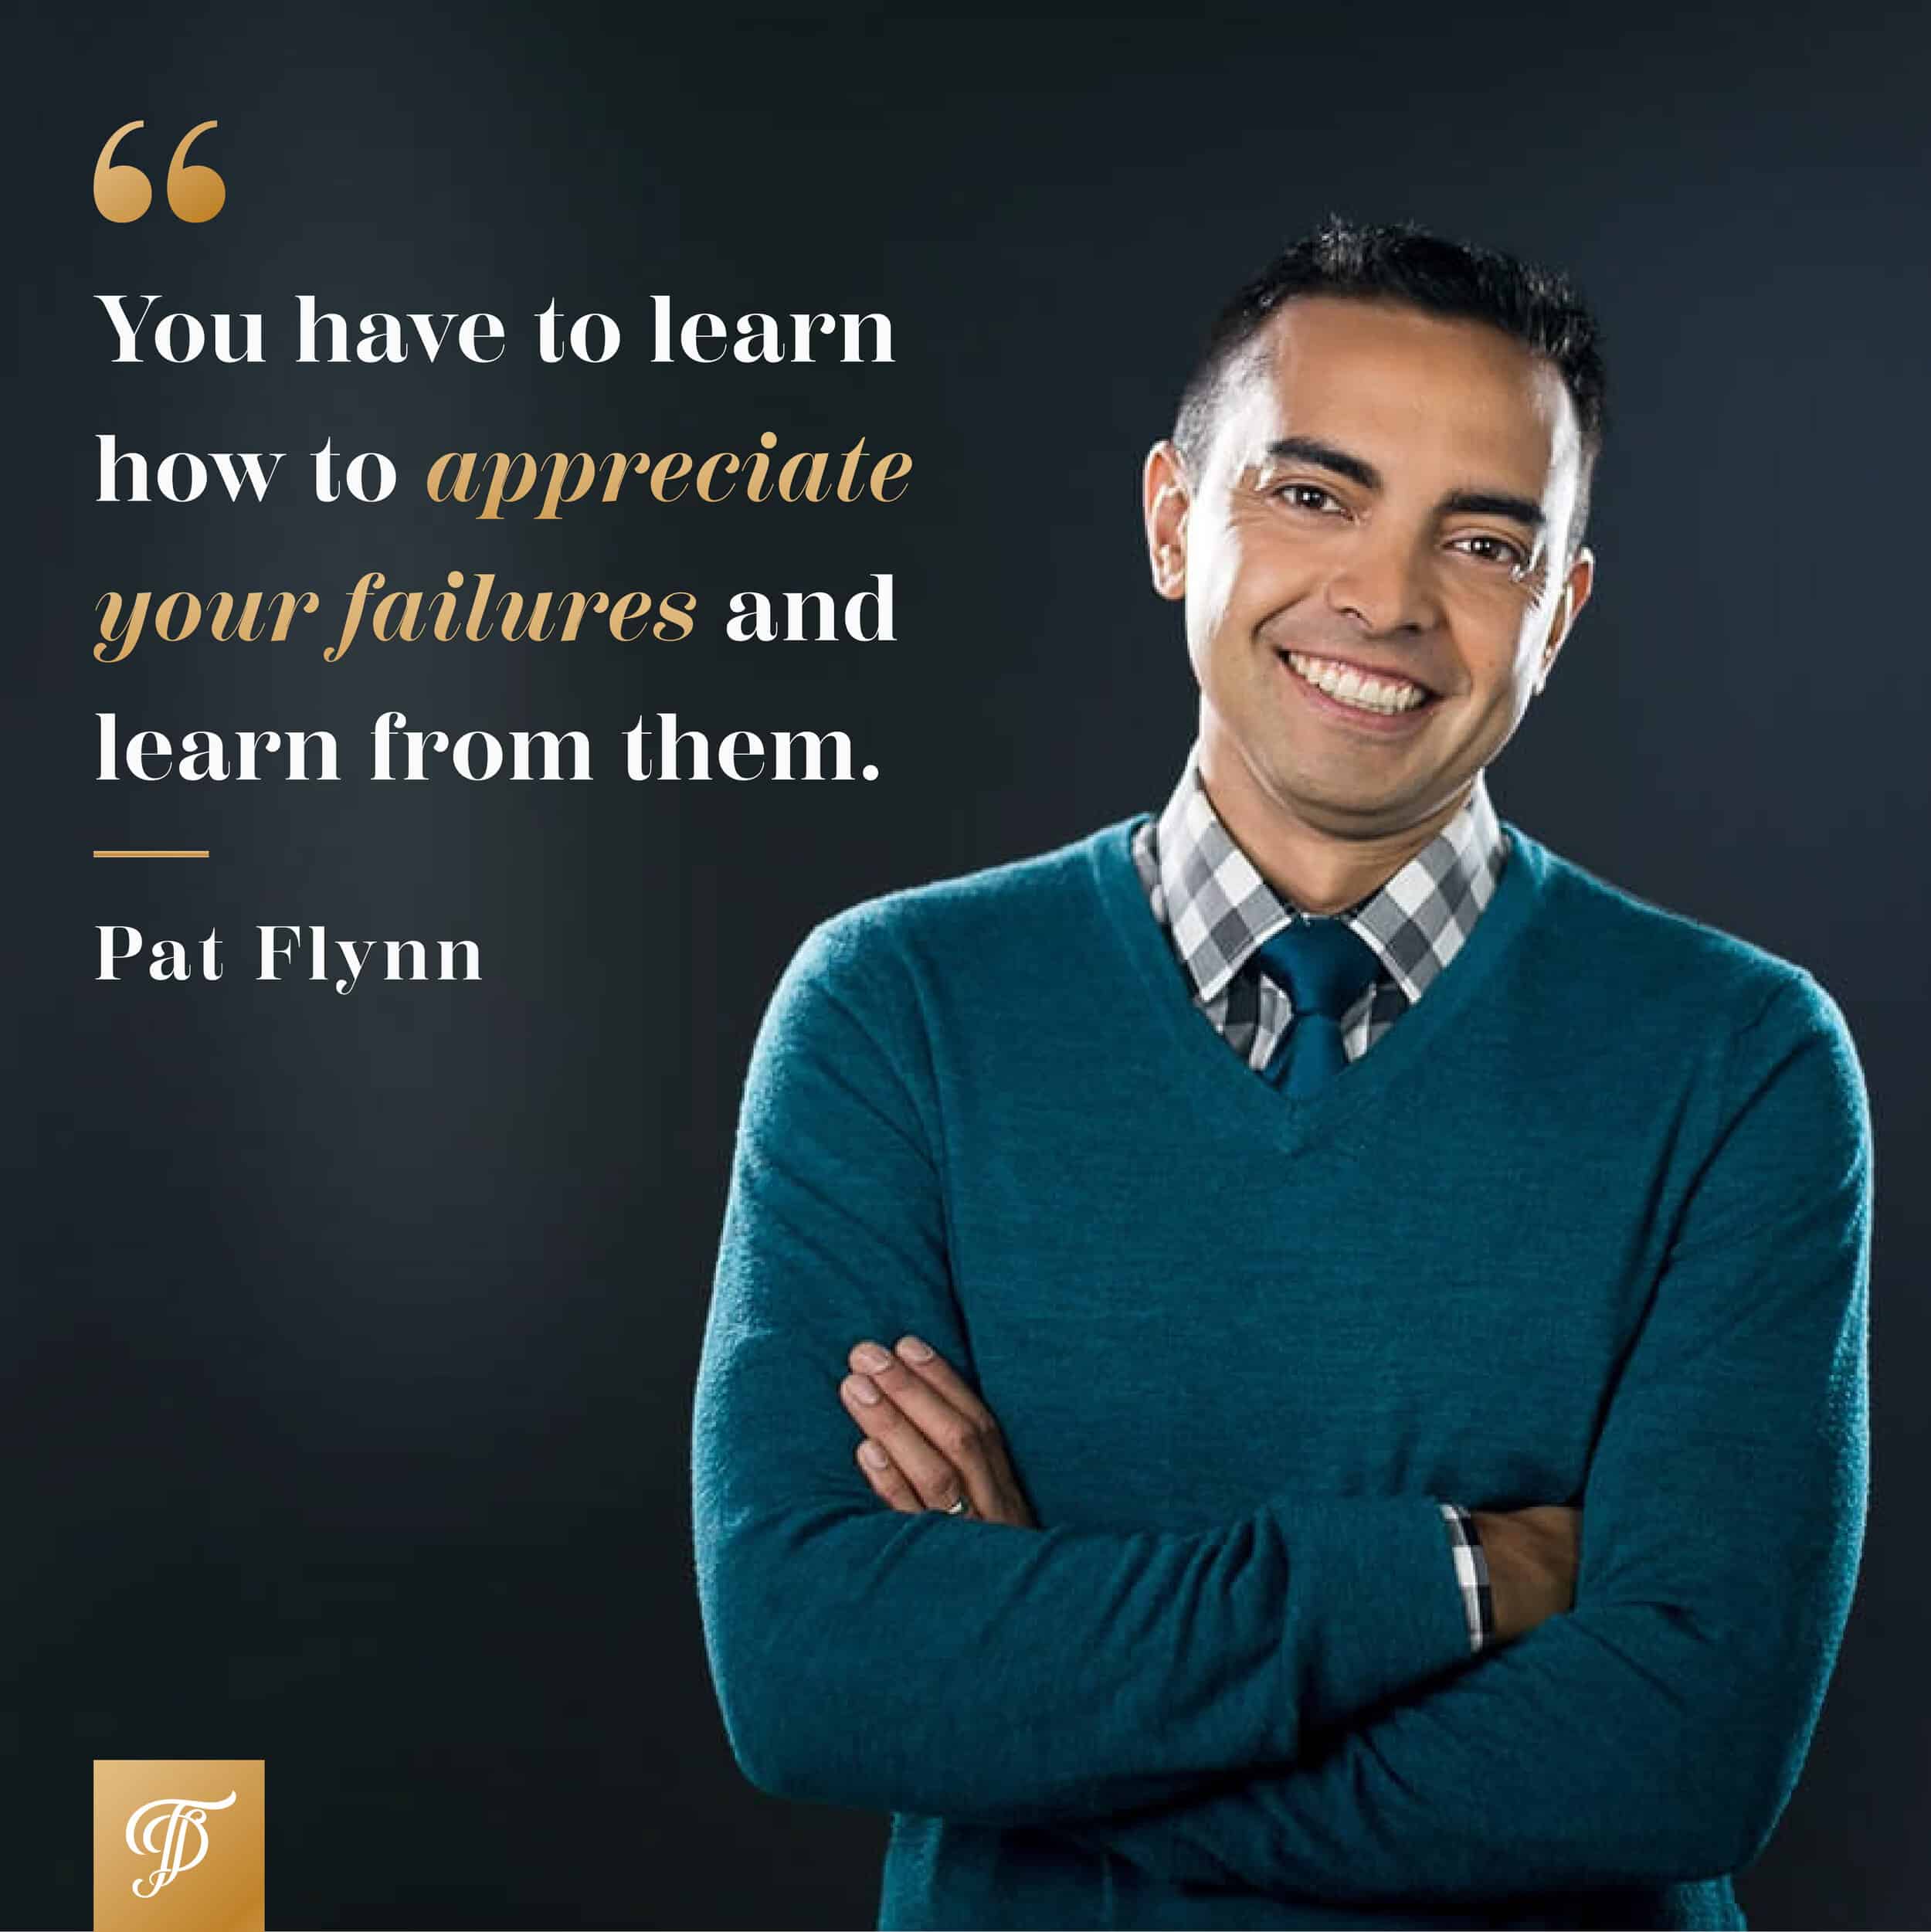 Pat Flynn, of Smart Passive Income, podcast interview on The Intentional Advantage